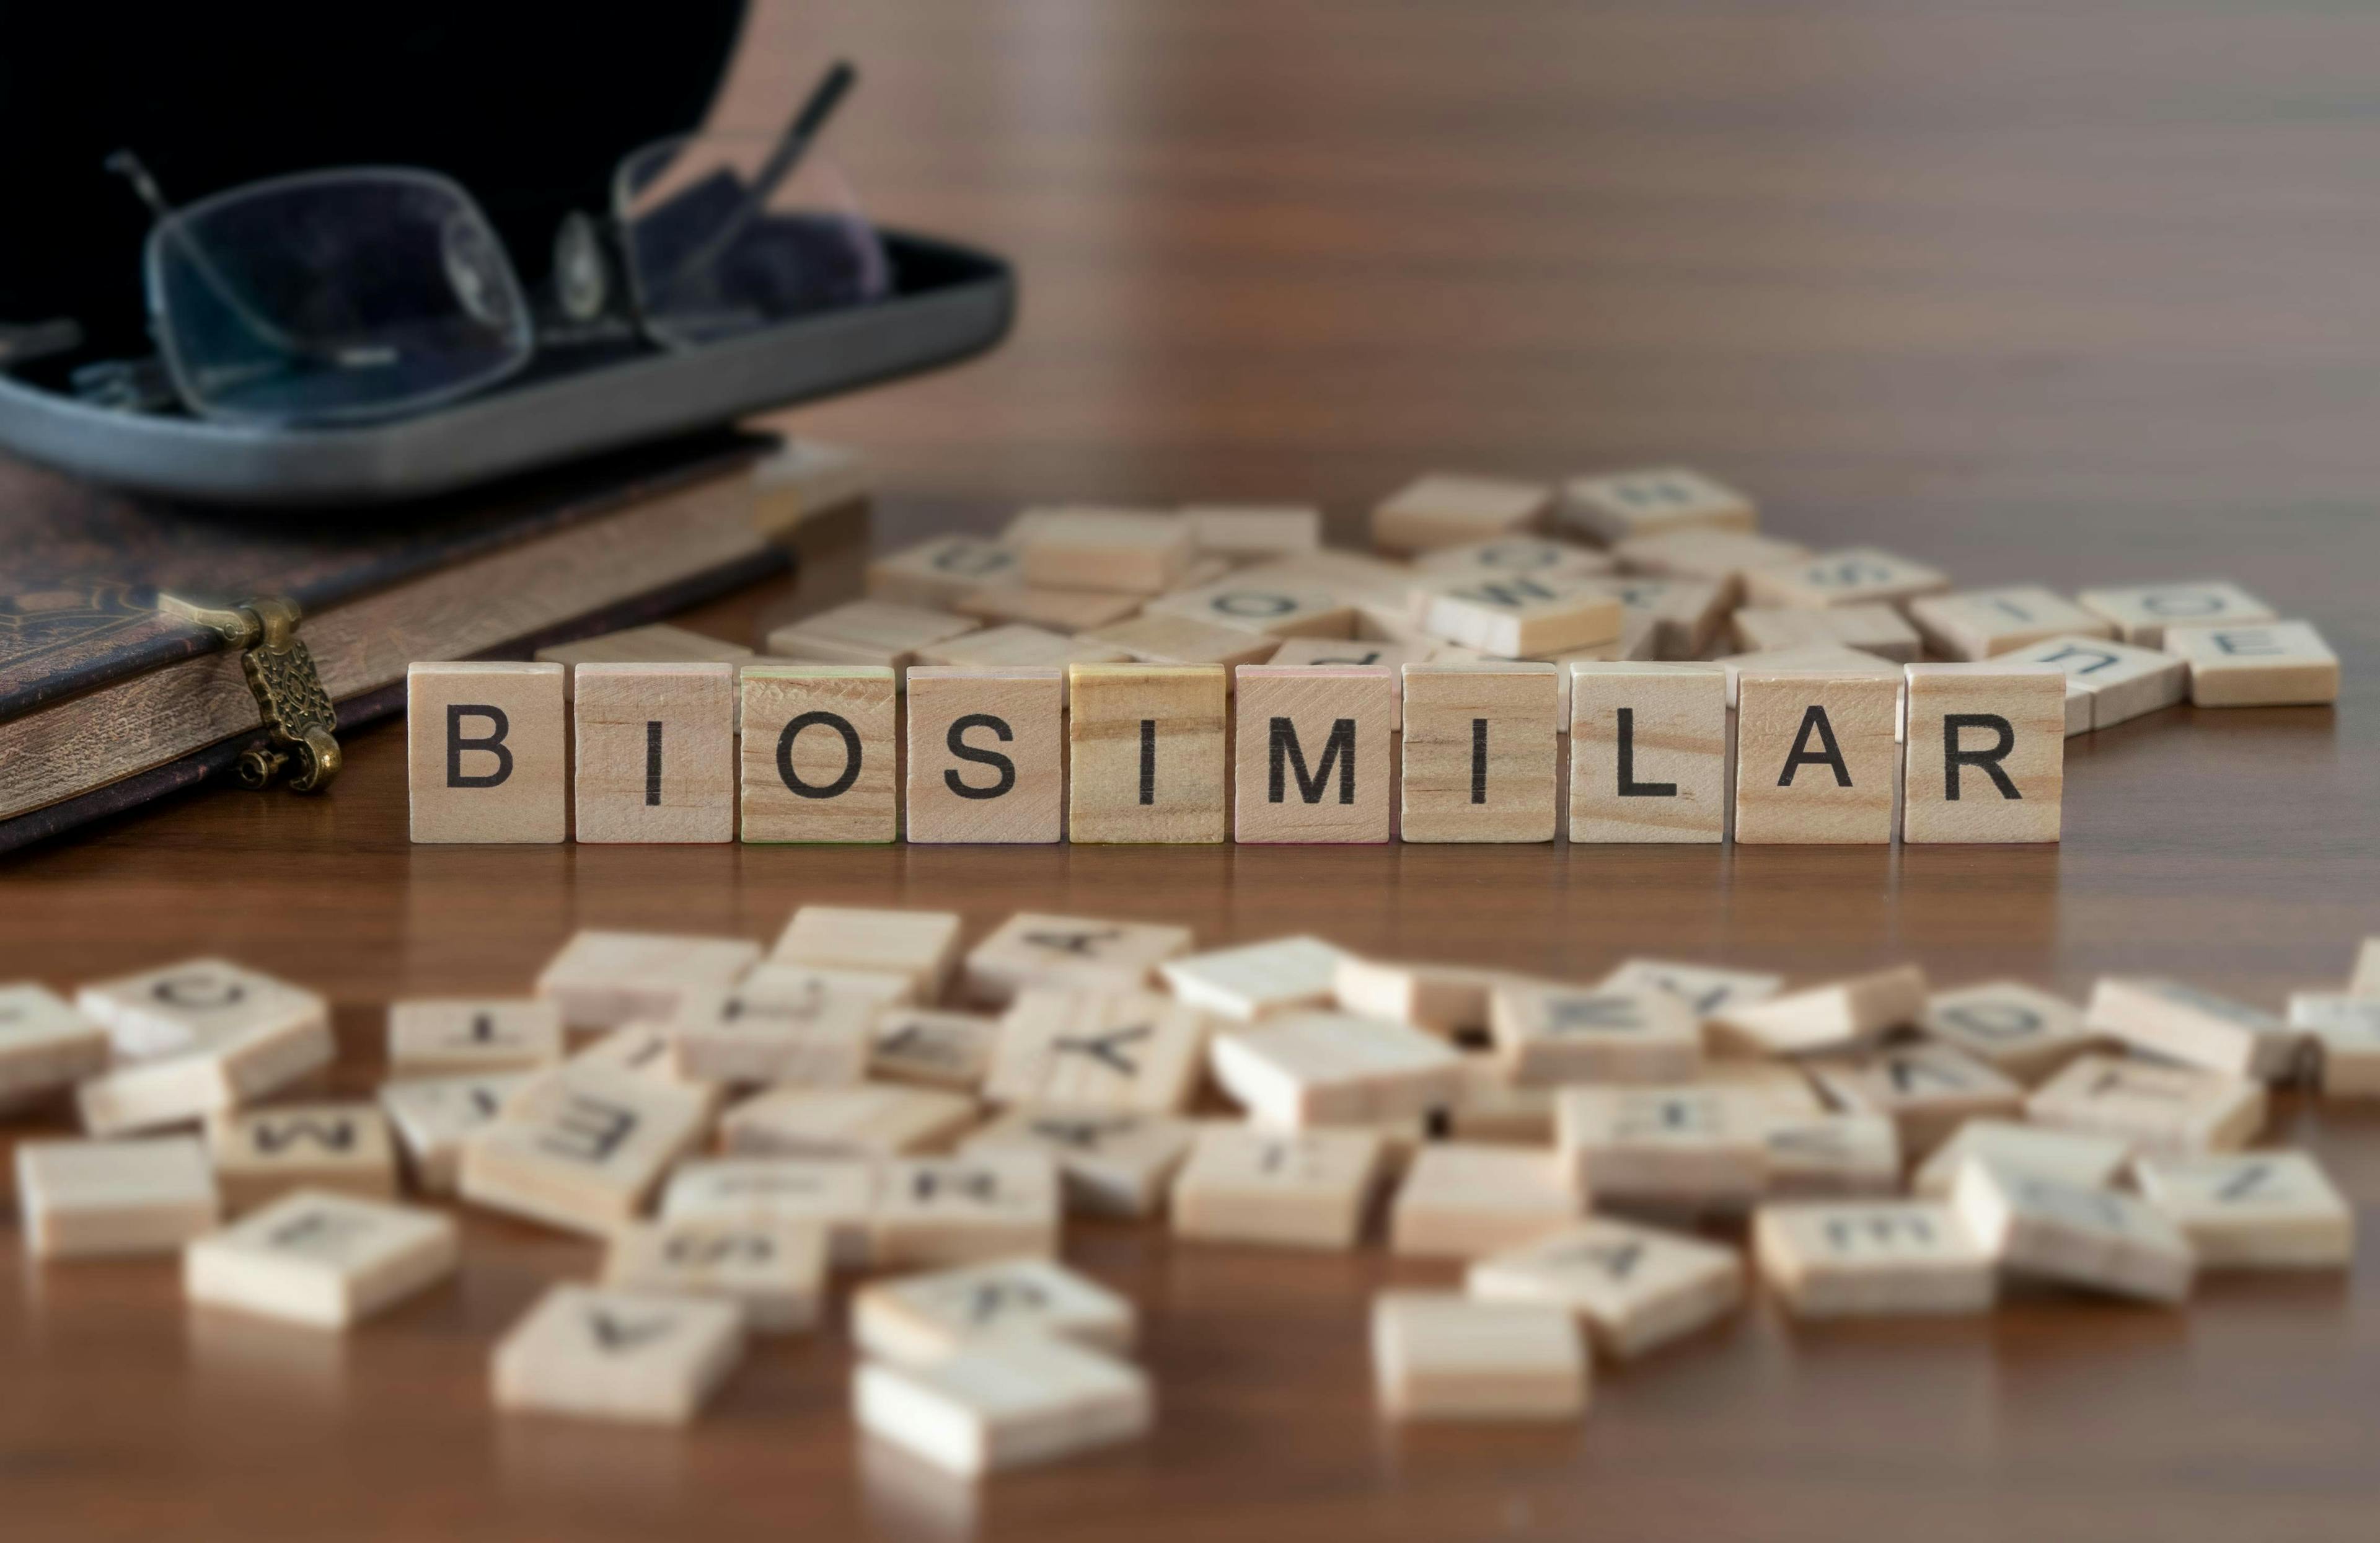 biosimilar word or concept represented by wooden letter tiles on a wooden table  | Image Credit: lexiconimages - stock.adobe.com